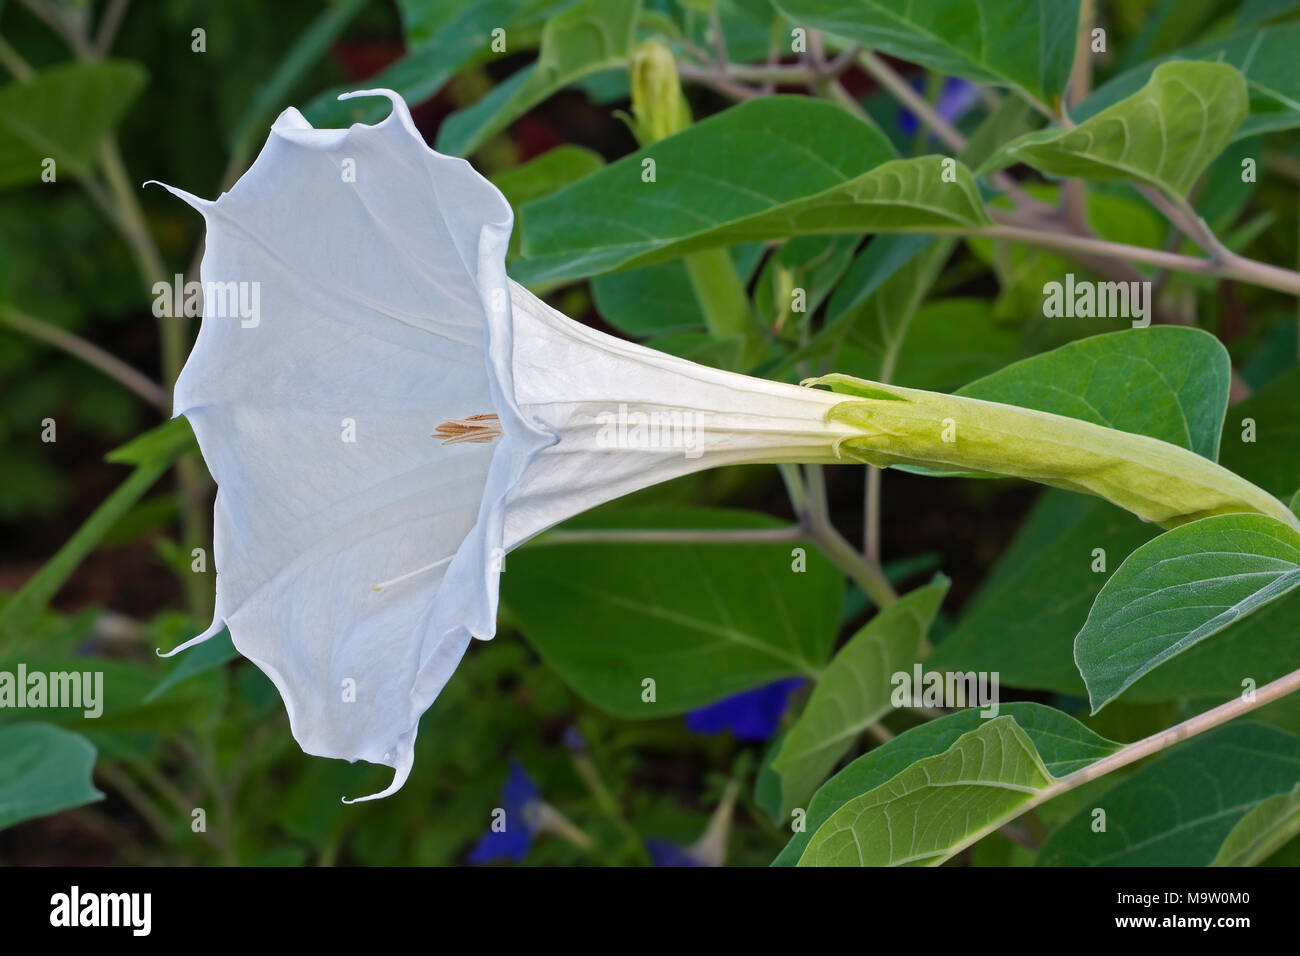 Devil's trumpet flower (Datura metel). Know also as Metel, Downy thorn apple and Horn of plenty. Stock Photo